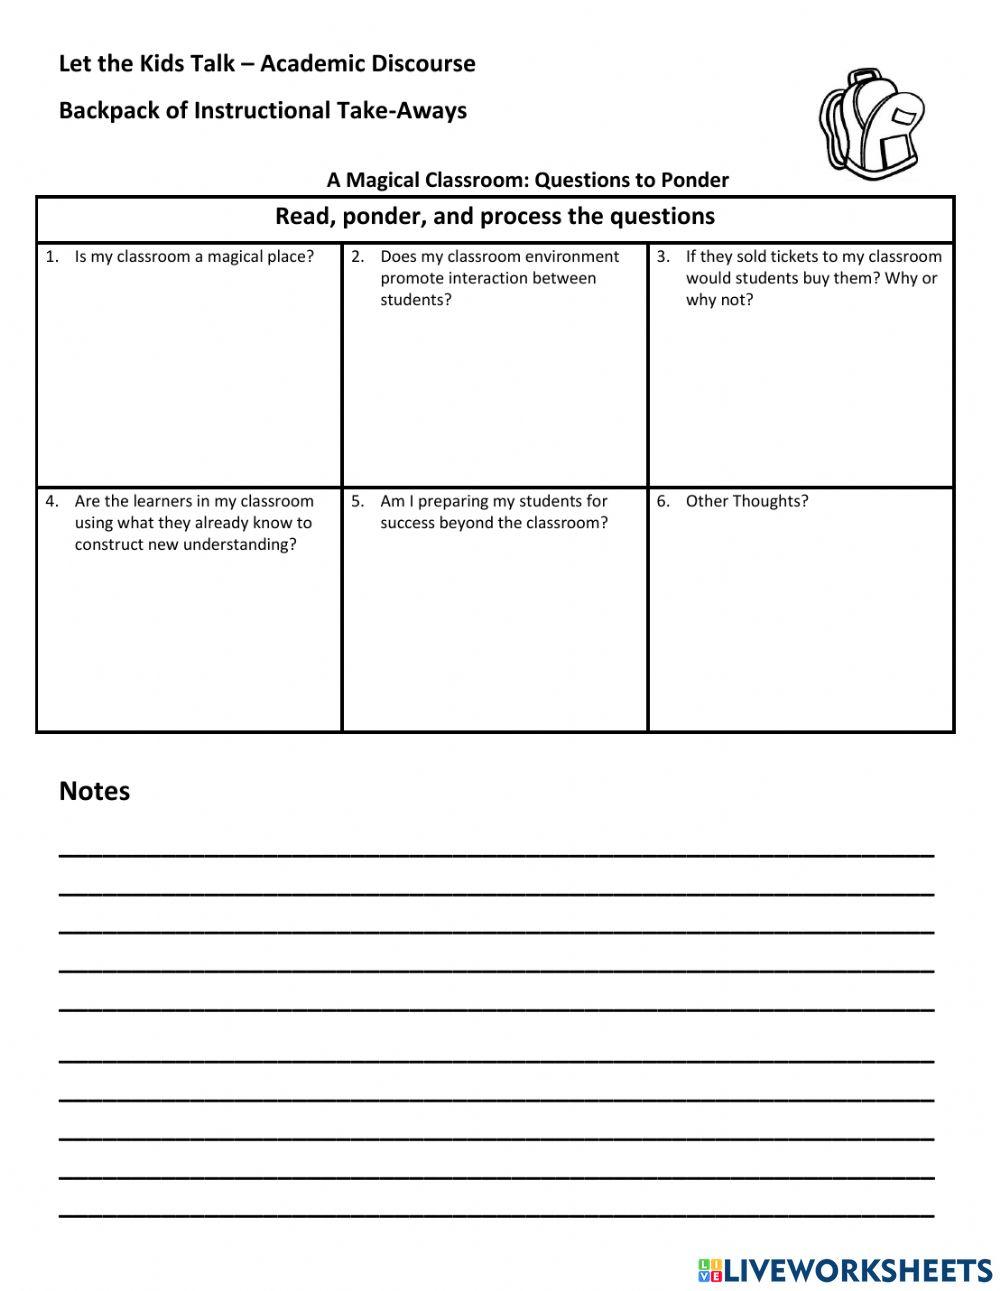 Let the Kids Talk- Academic Discourse Note-taking Sheet